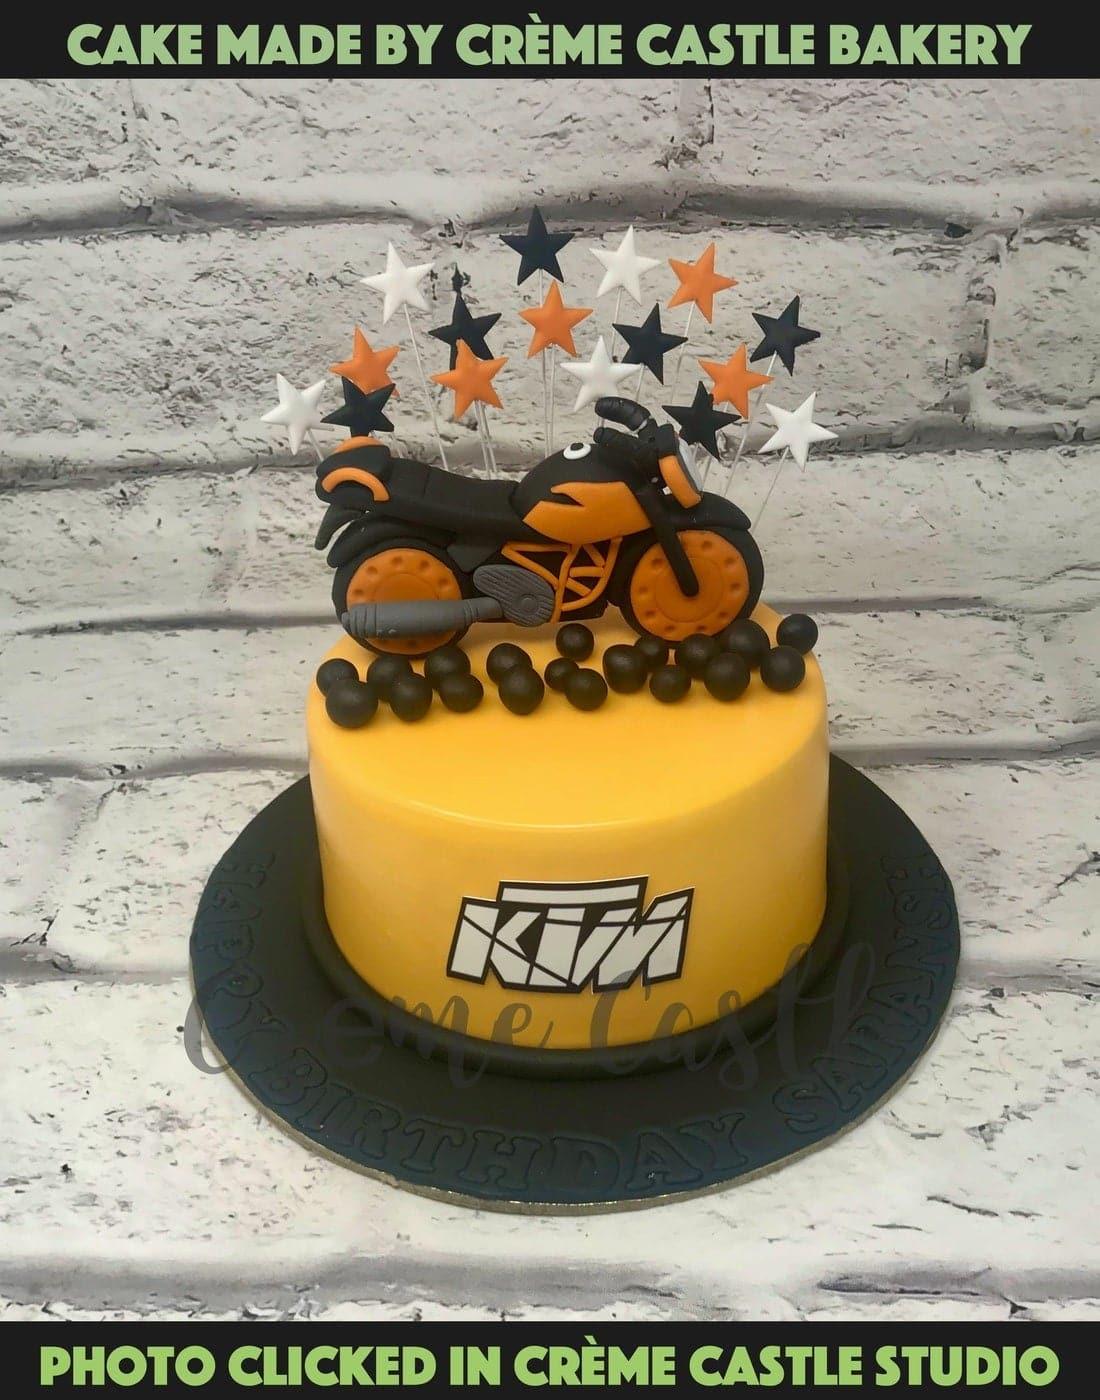 Bike Theme Cake with KTM  by Creme Castle